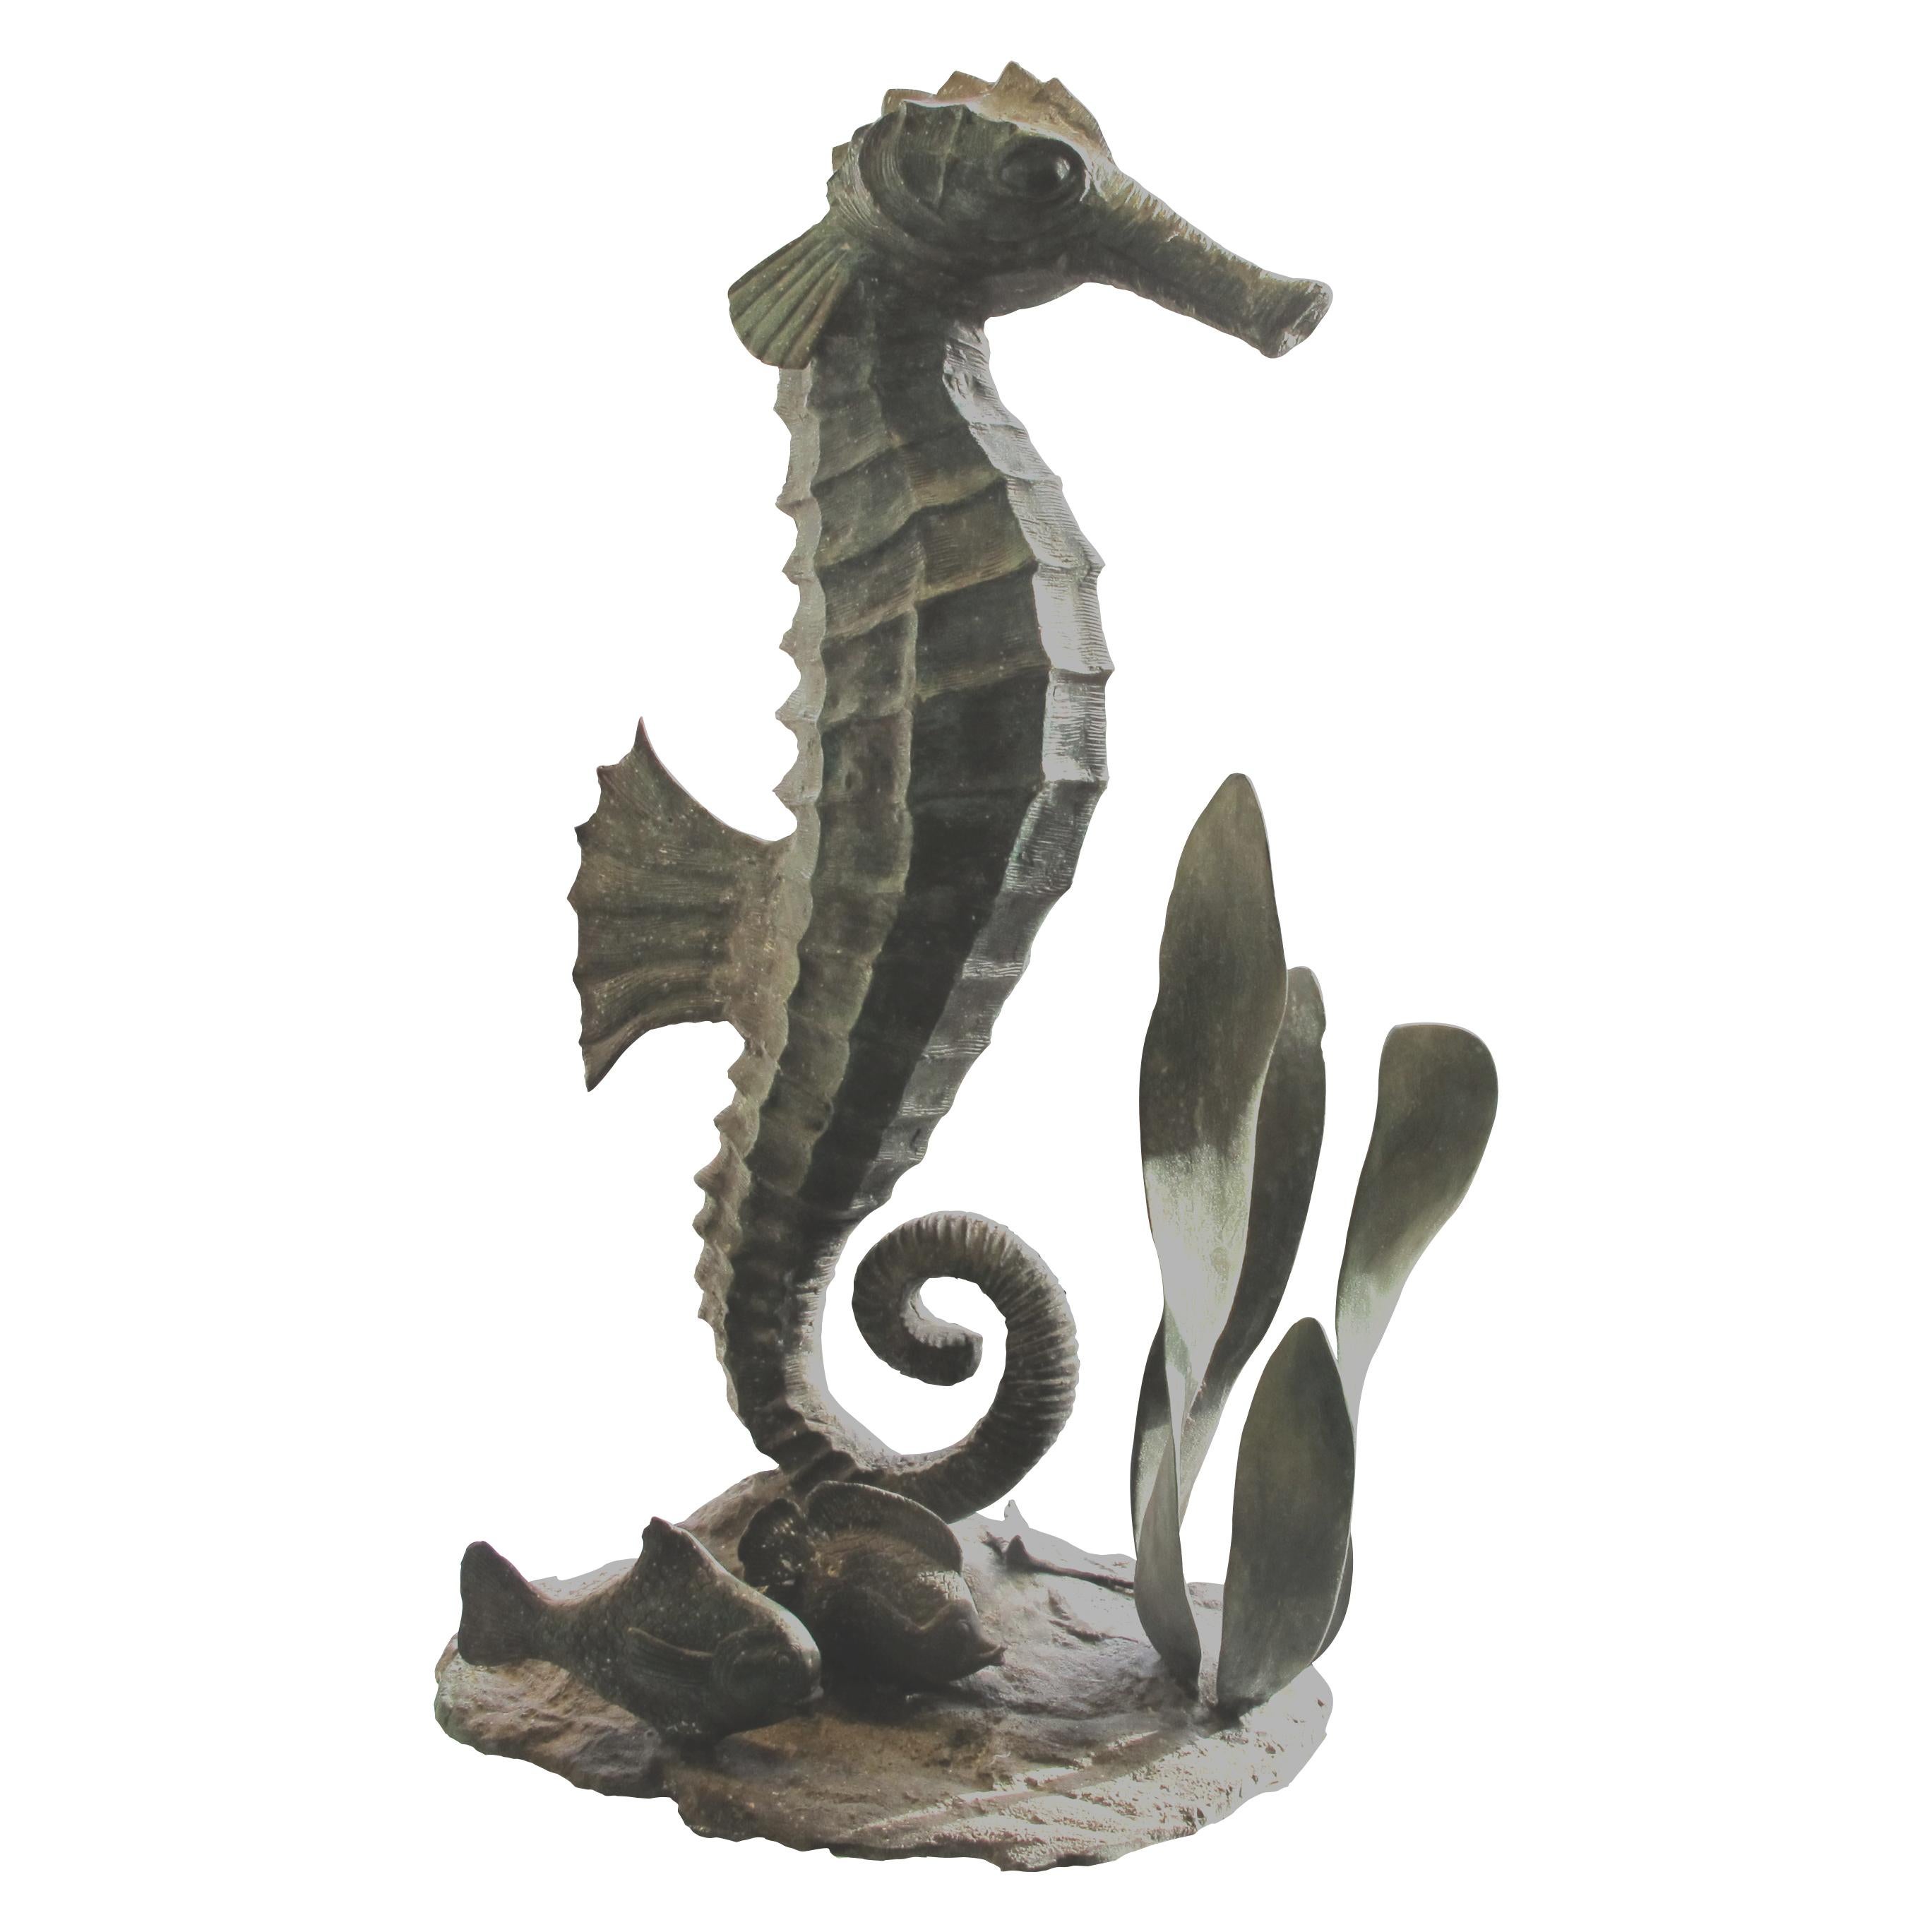 Hand-Crafted 1920s/30s Large French Art Deco Unique Bronze Sculpture of a Sea Horse